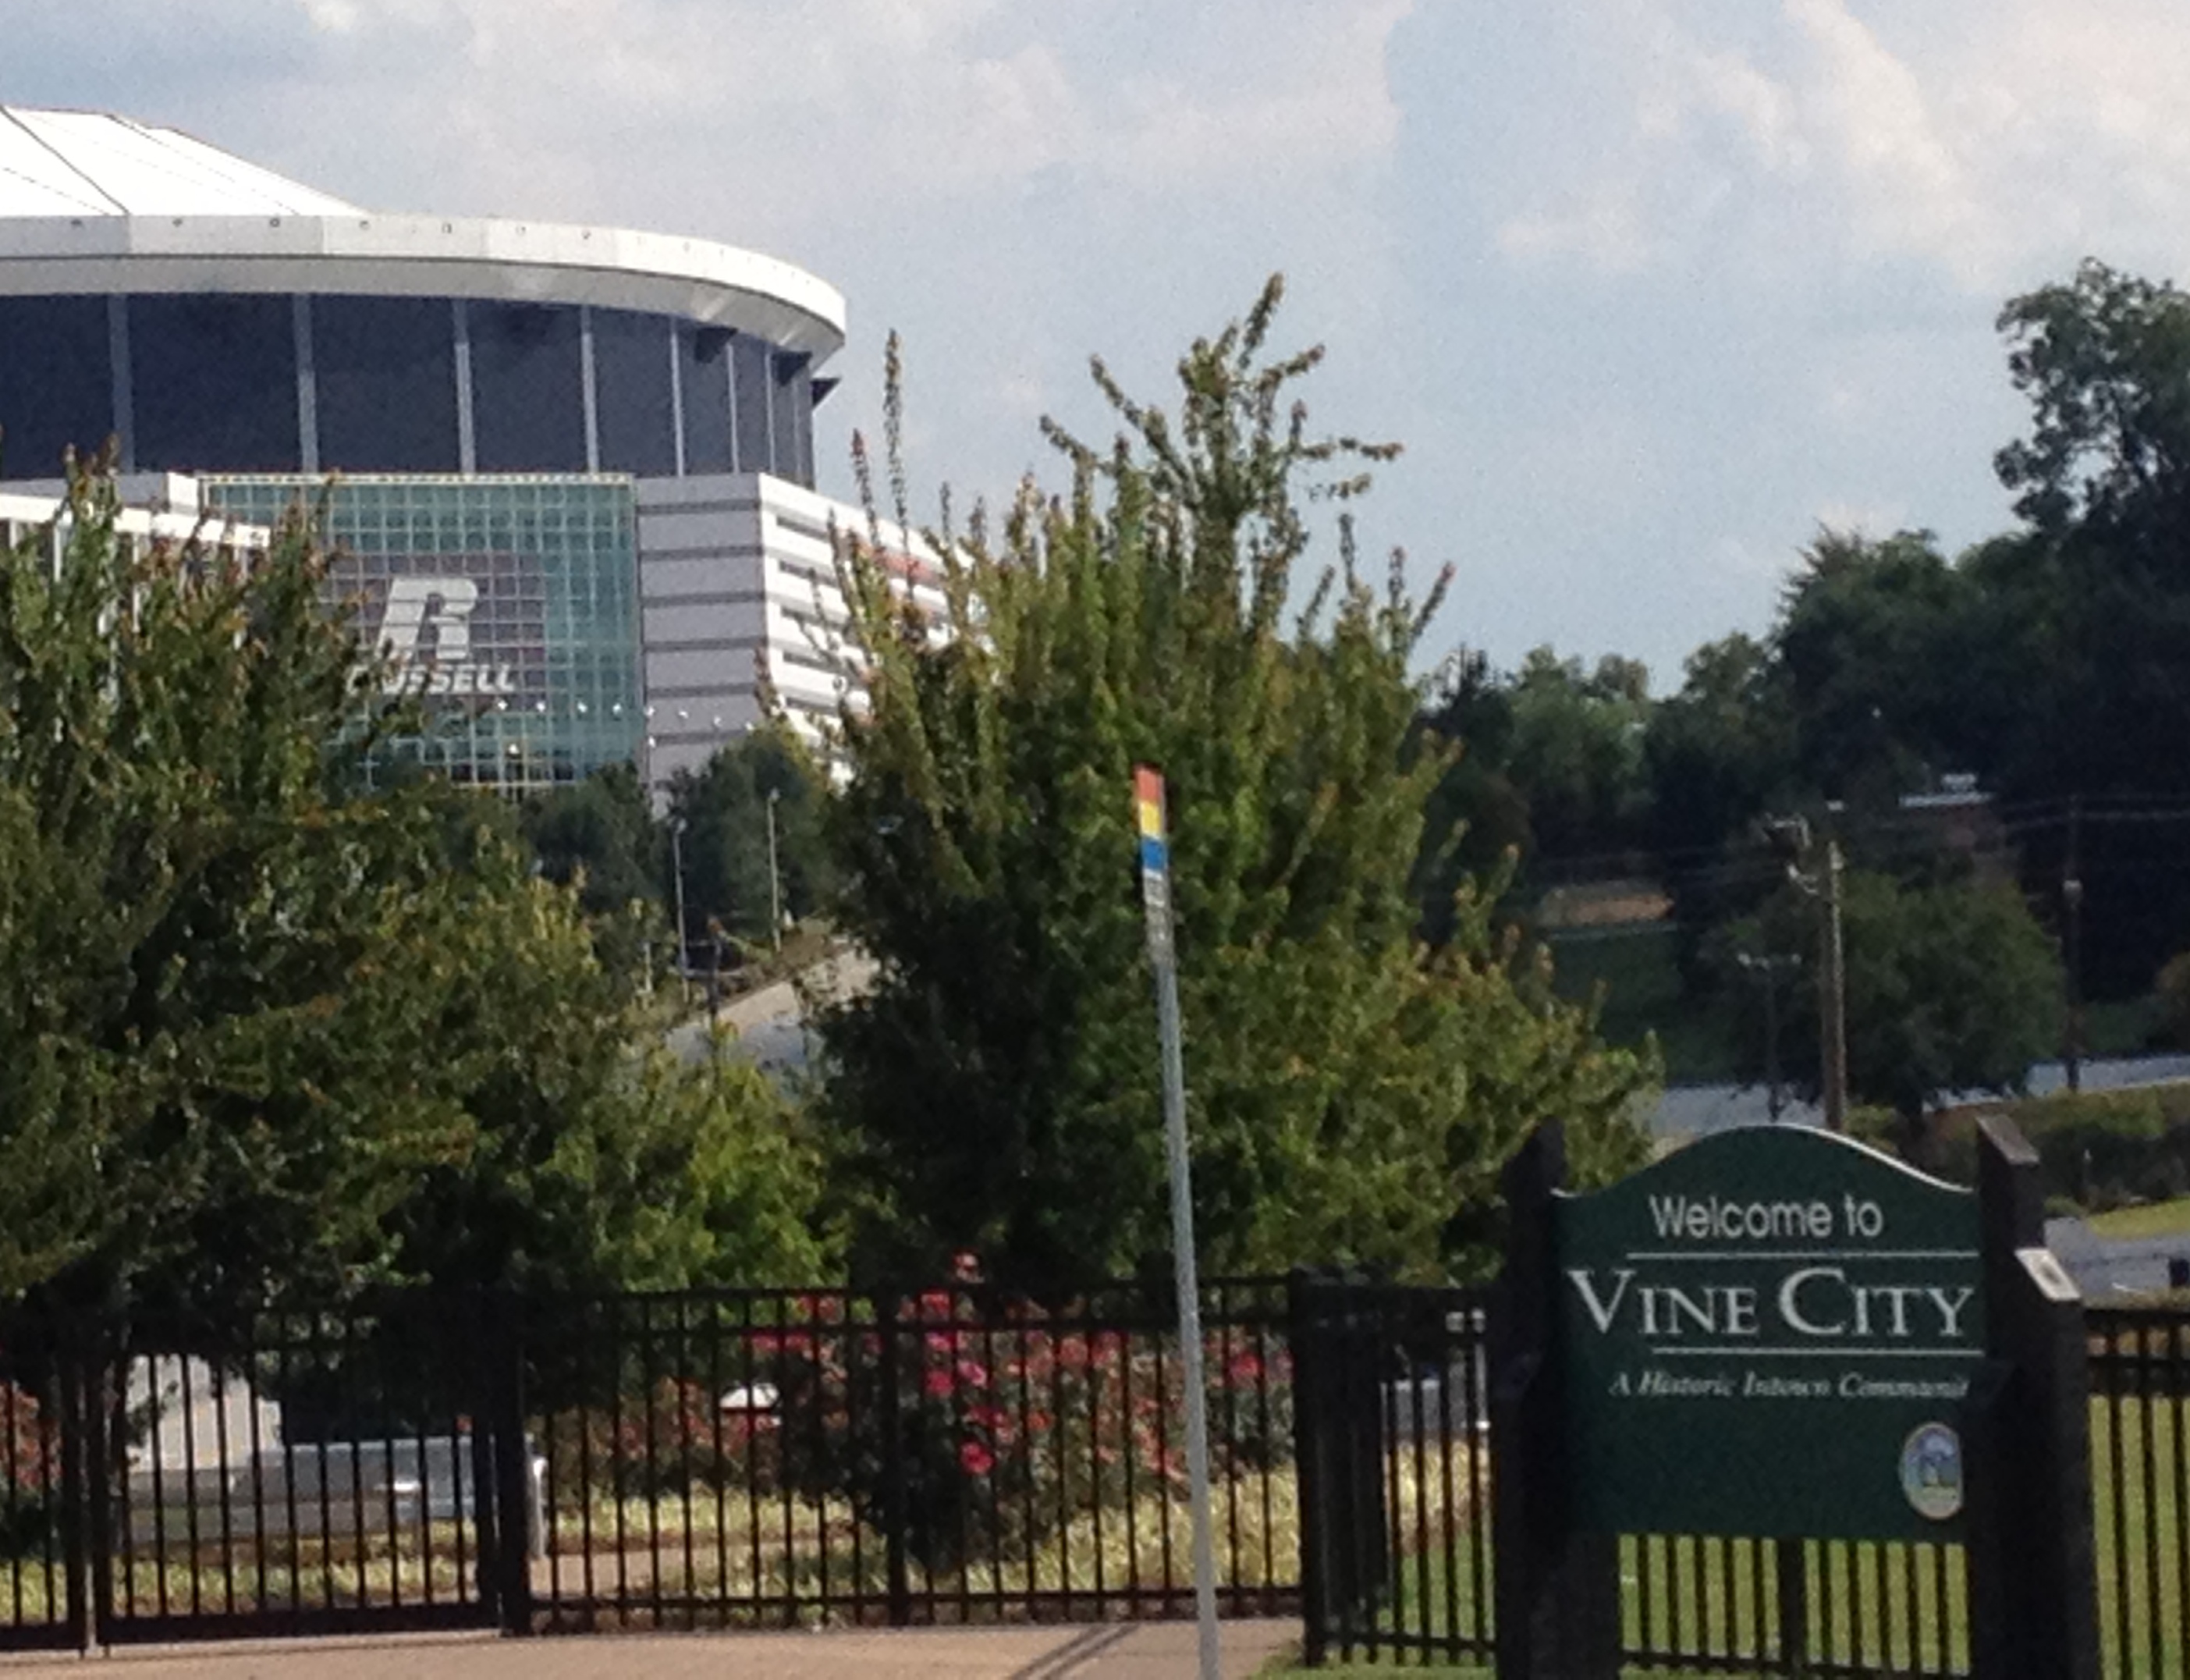 Vine_City_sign_with_Georgia_Dome_in_background